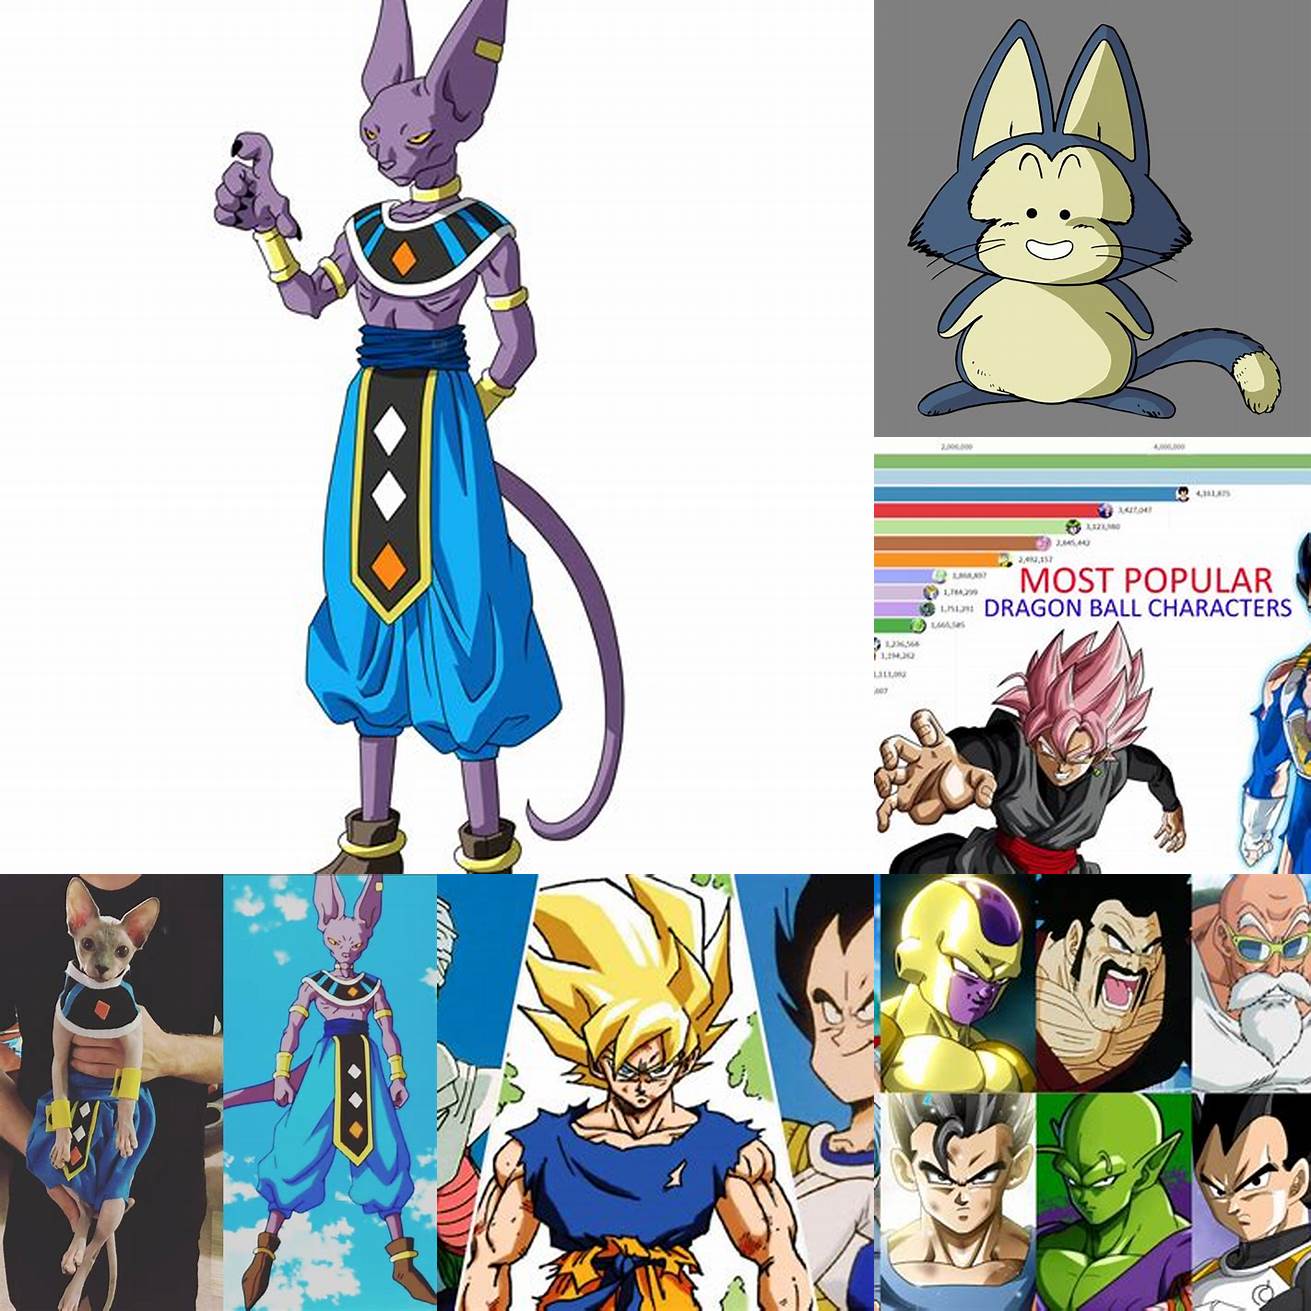 Who is the most popular Cat Dragon Ball Z character